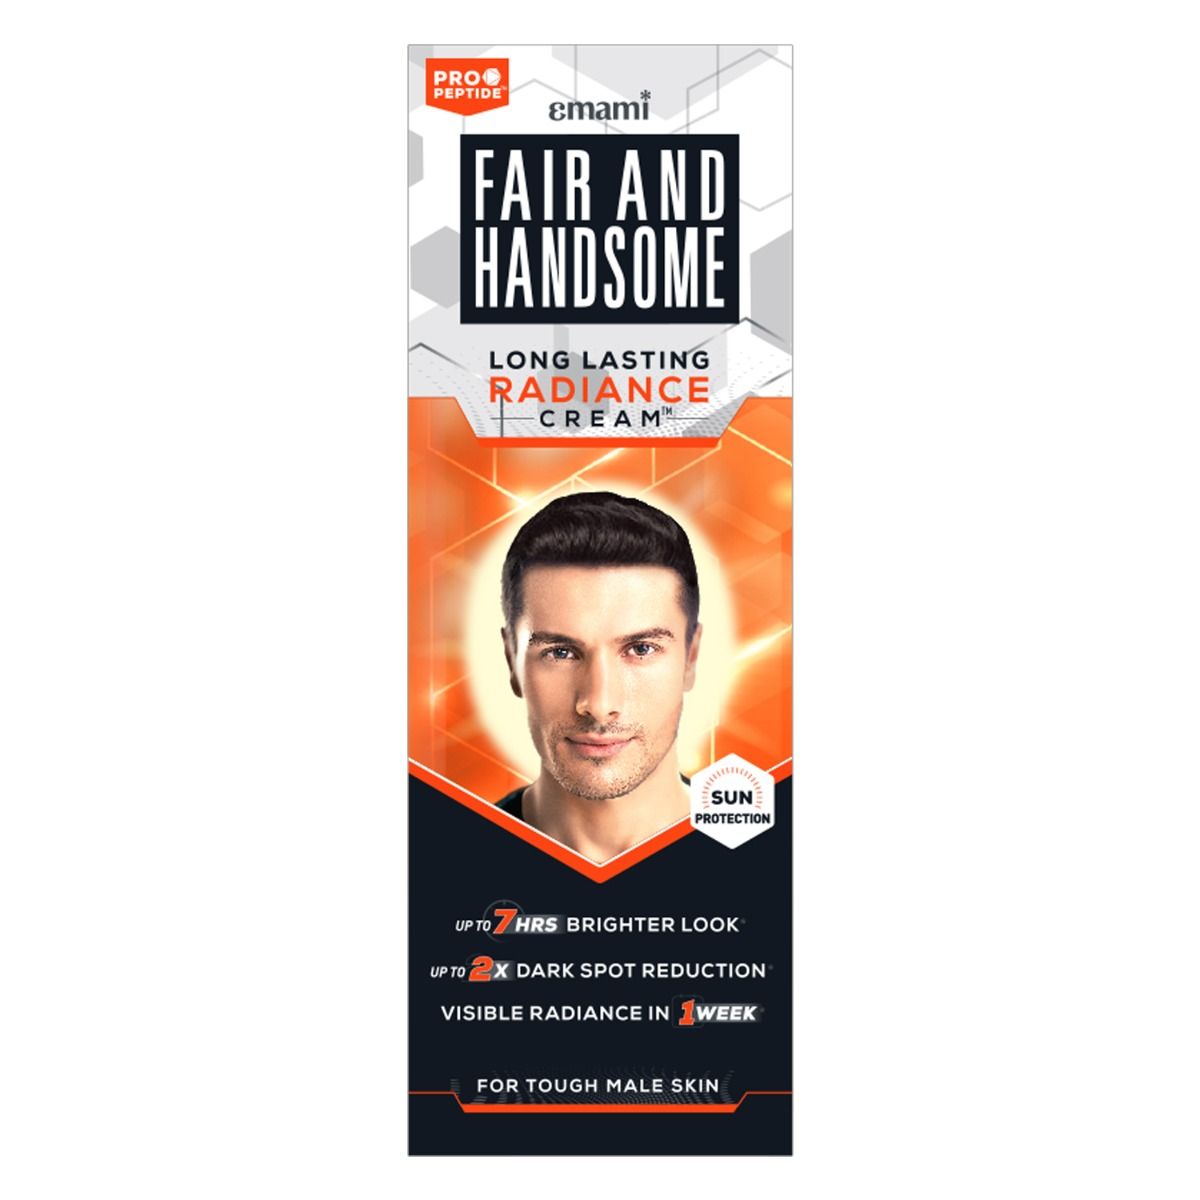 Fair and Handsome Long Lasting Radiance Cream, 30 gm, Pack of 1 